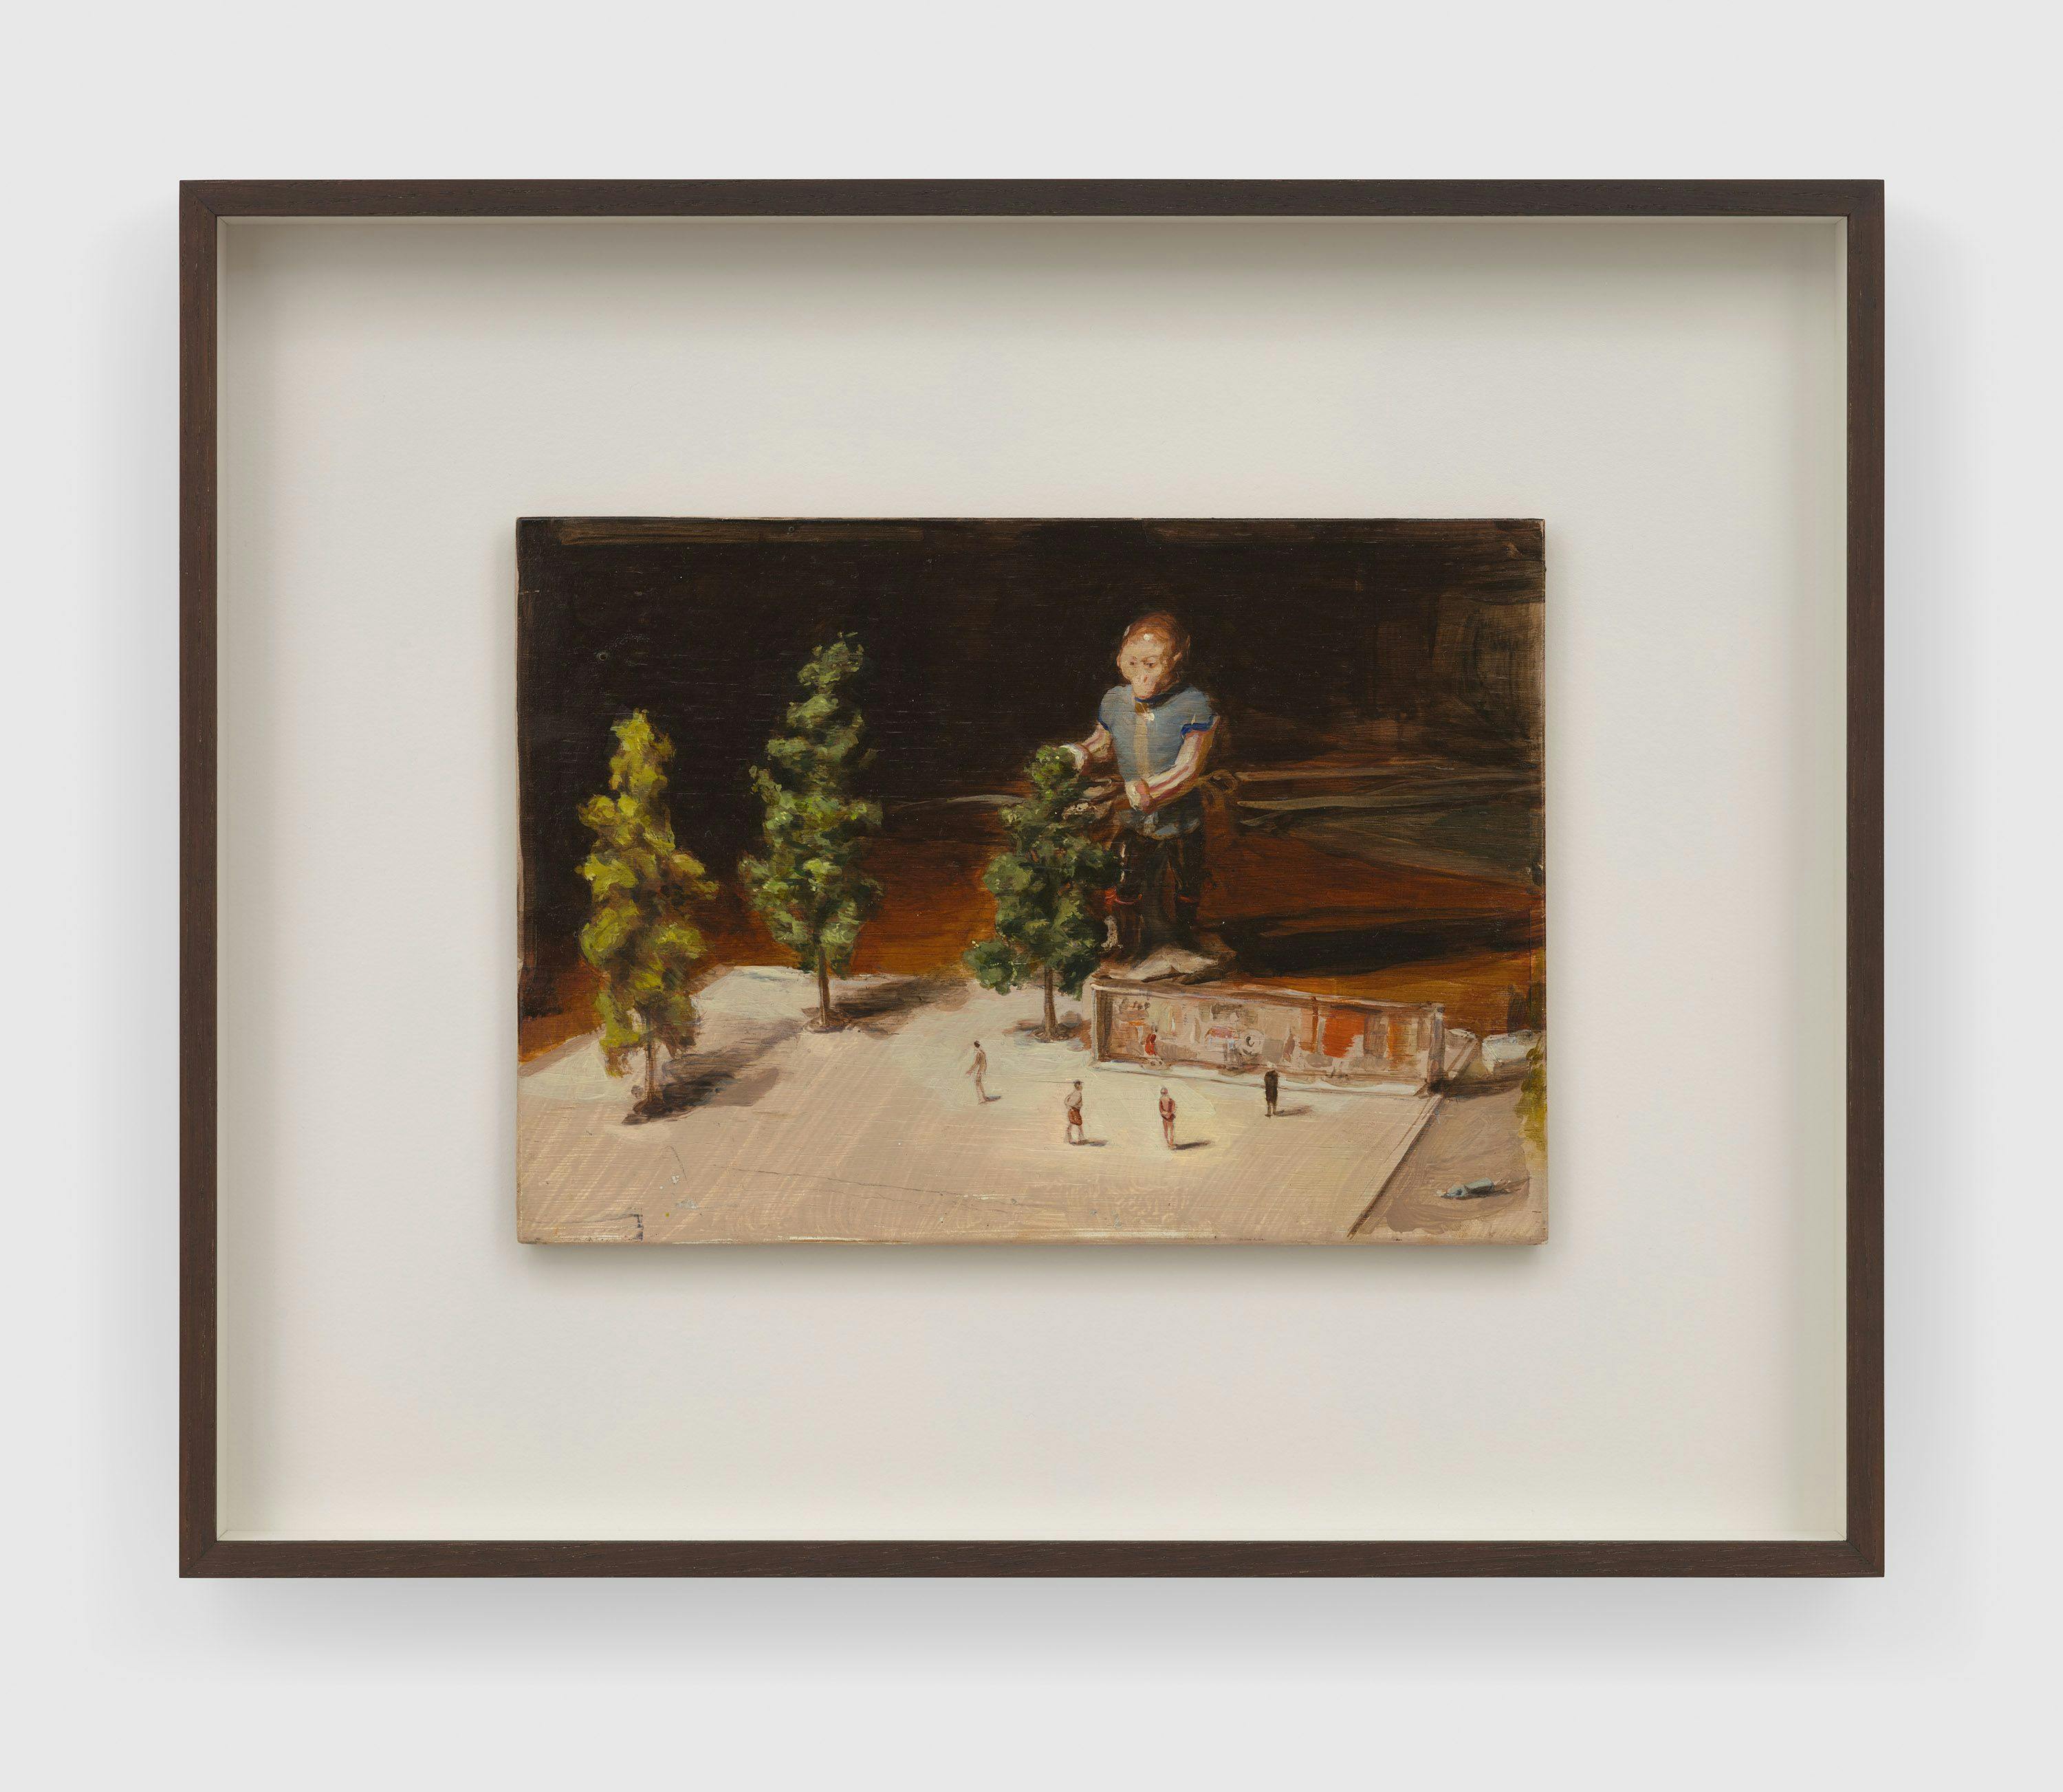 A painting by Michaël Borremans, titled The Gardener, dated 2023.